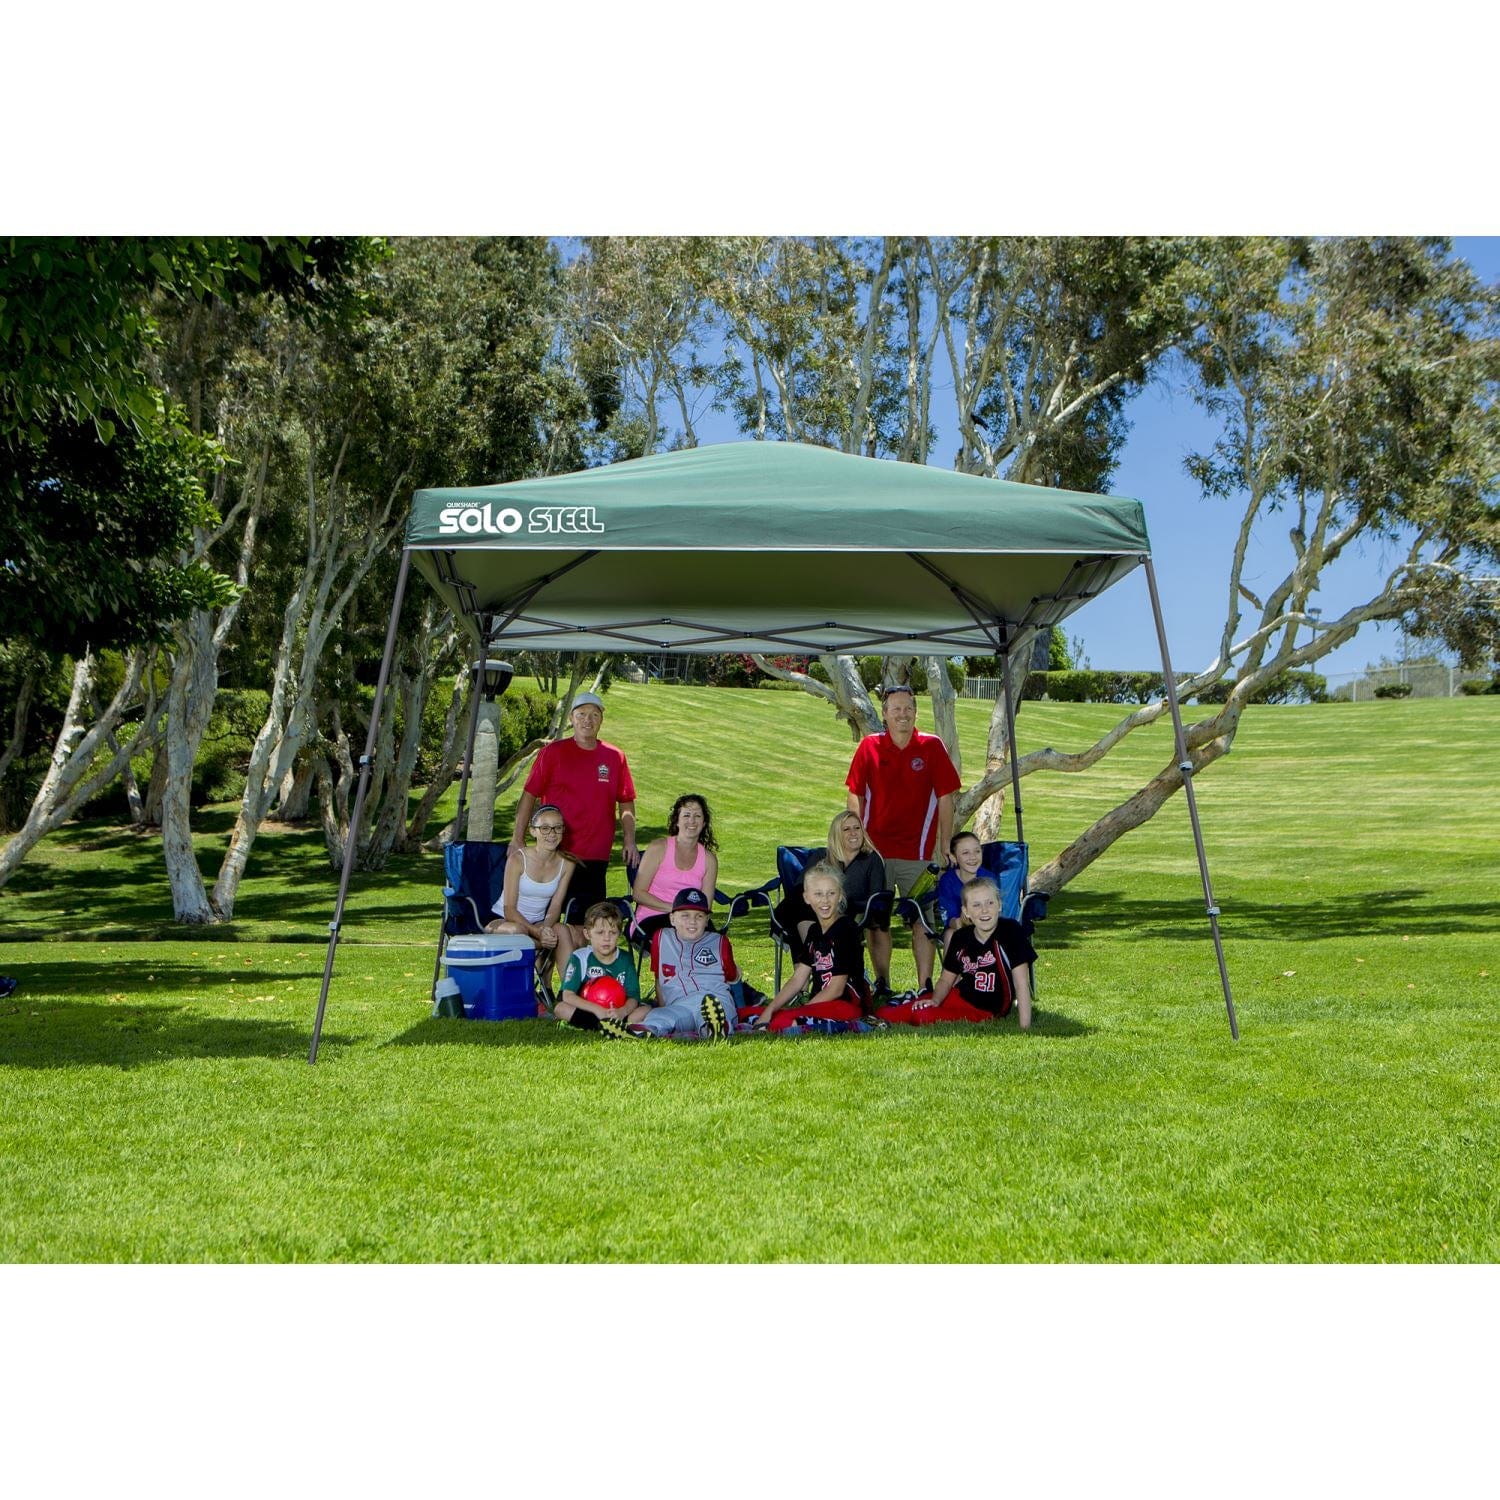 Quik Shade Pop Up Canopies Quik Shade | Solo Steel 90 11' x 11' Slant Leg Canopy - Turquoise 167536DS